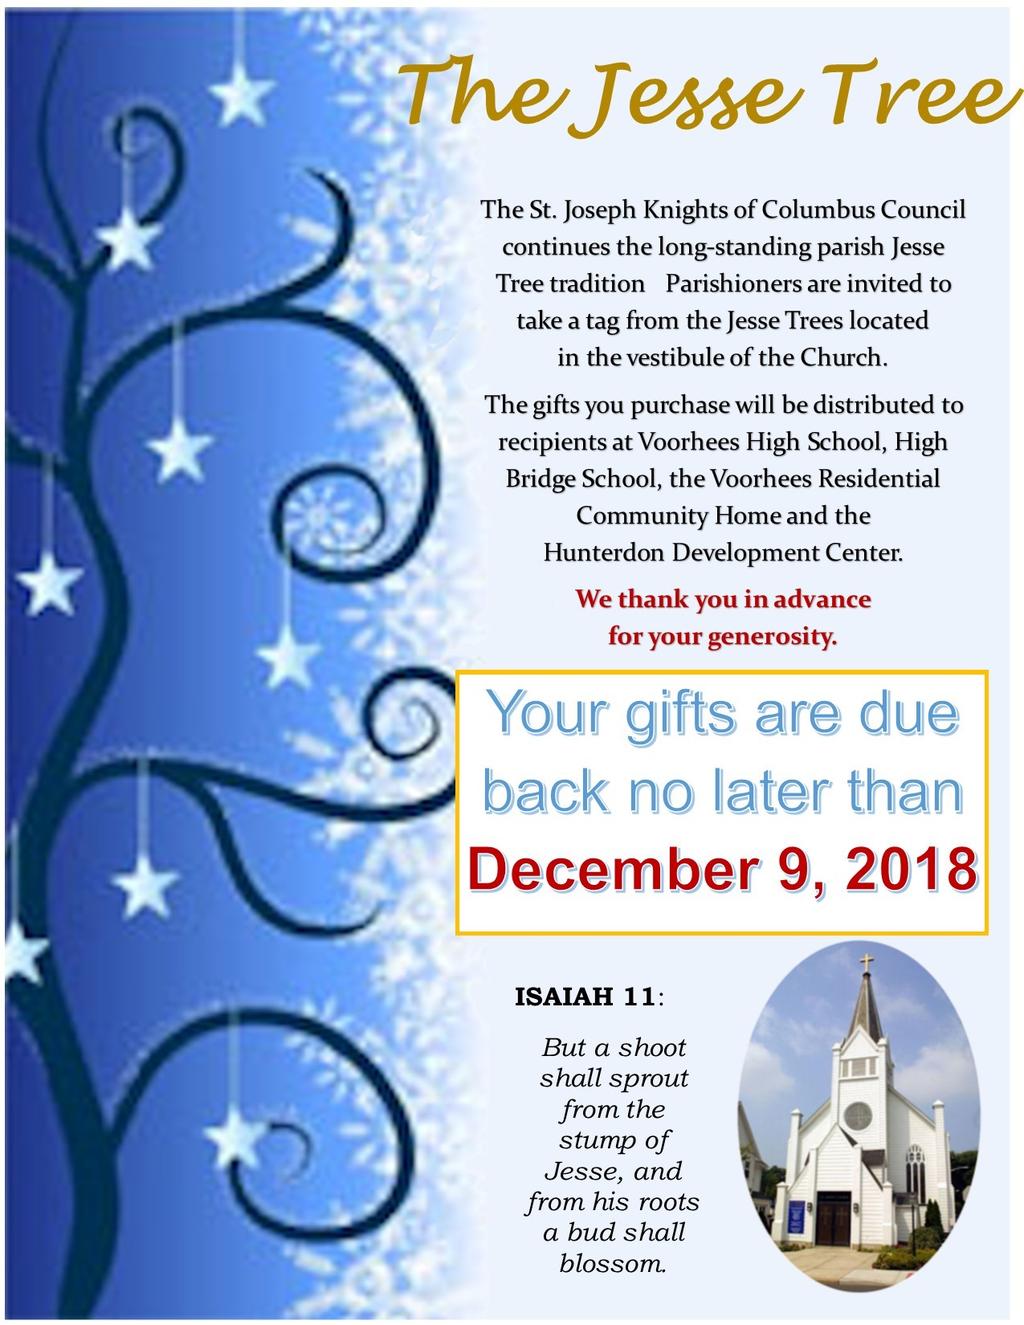 The Knights of Columbus 5th Sunday Rosary Program encourages greater devotion to the Blessed Virgin Mary. Devotions are conducted following the 11am Mass at St.